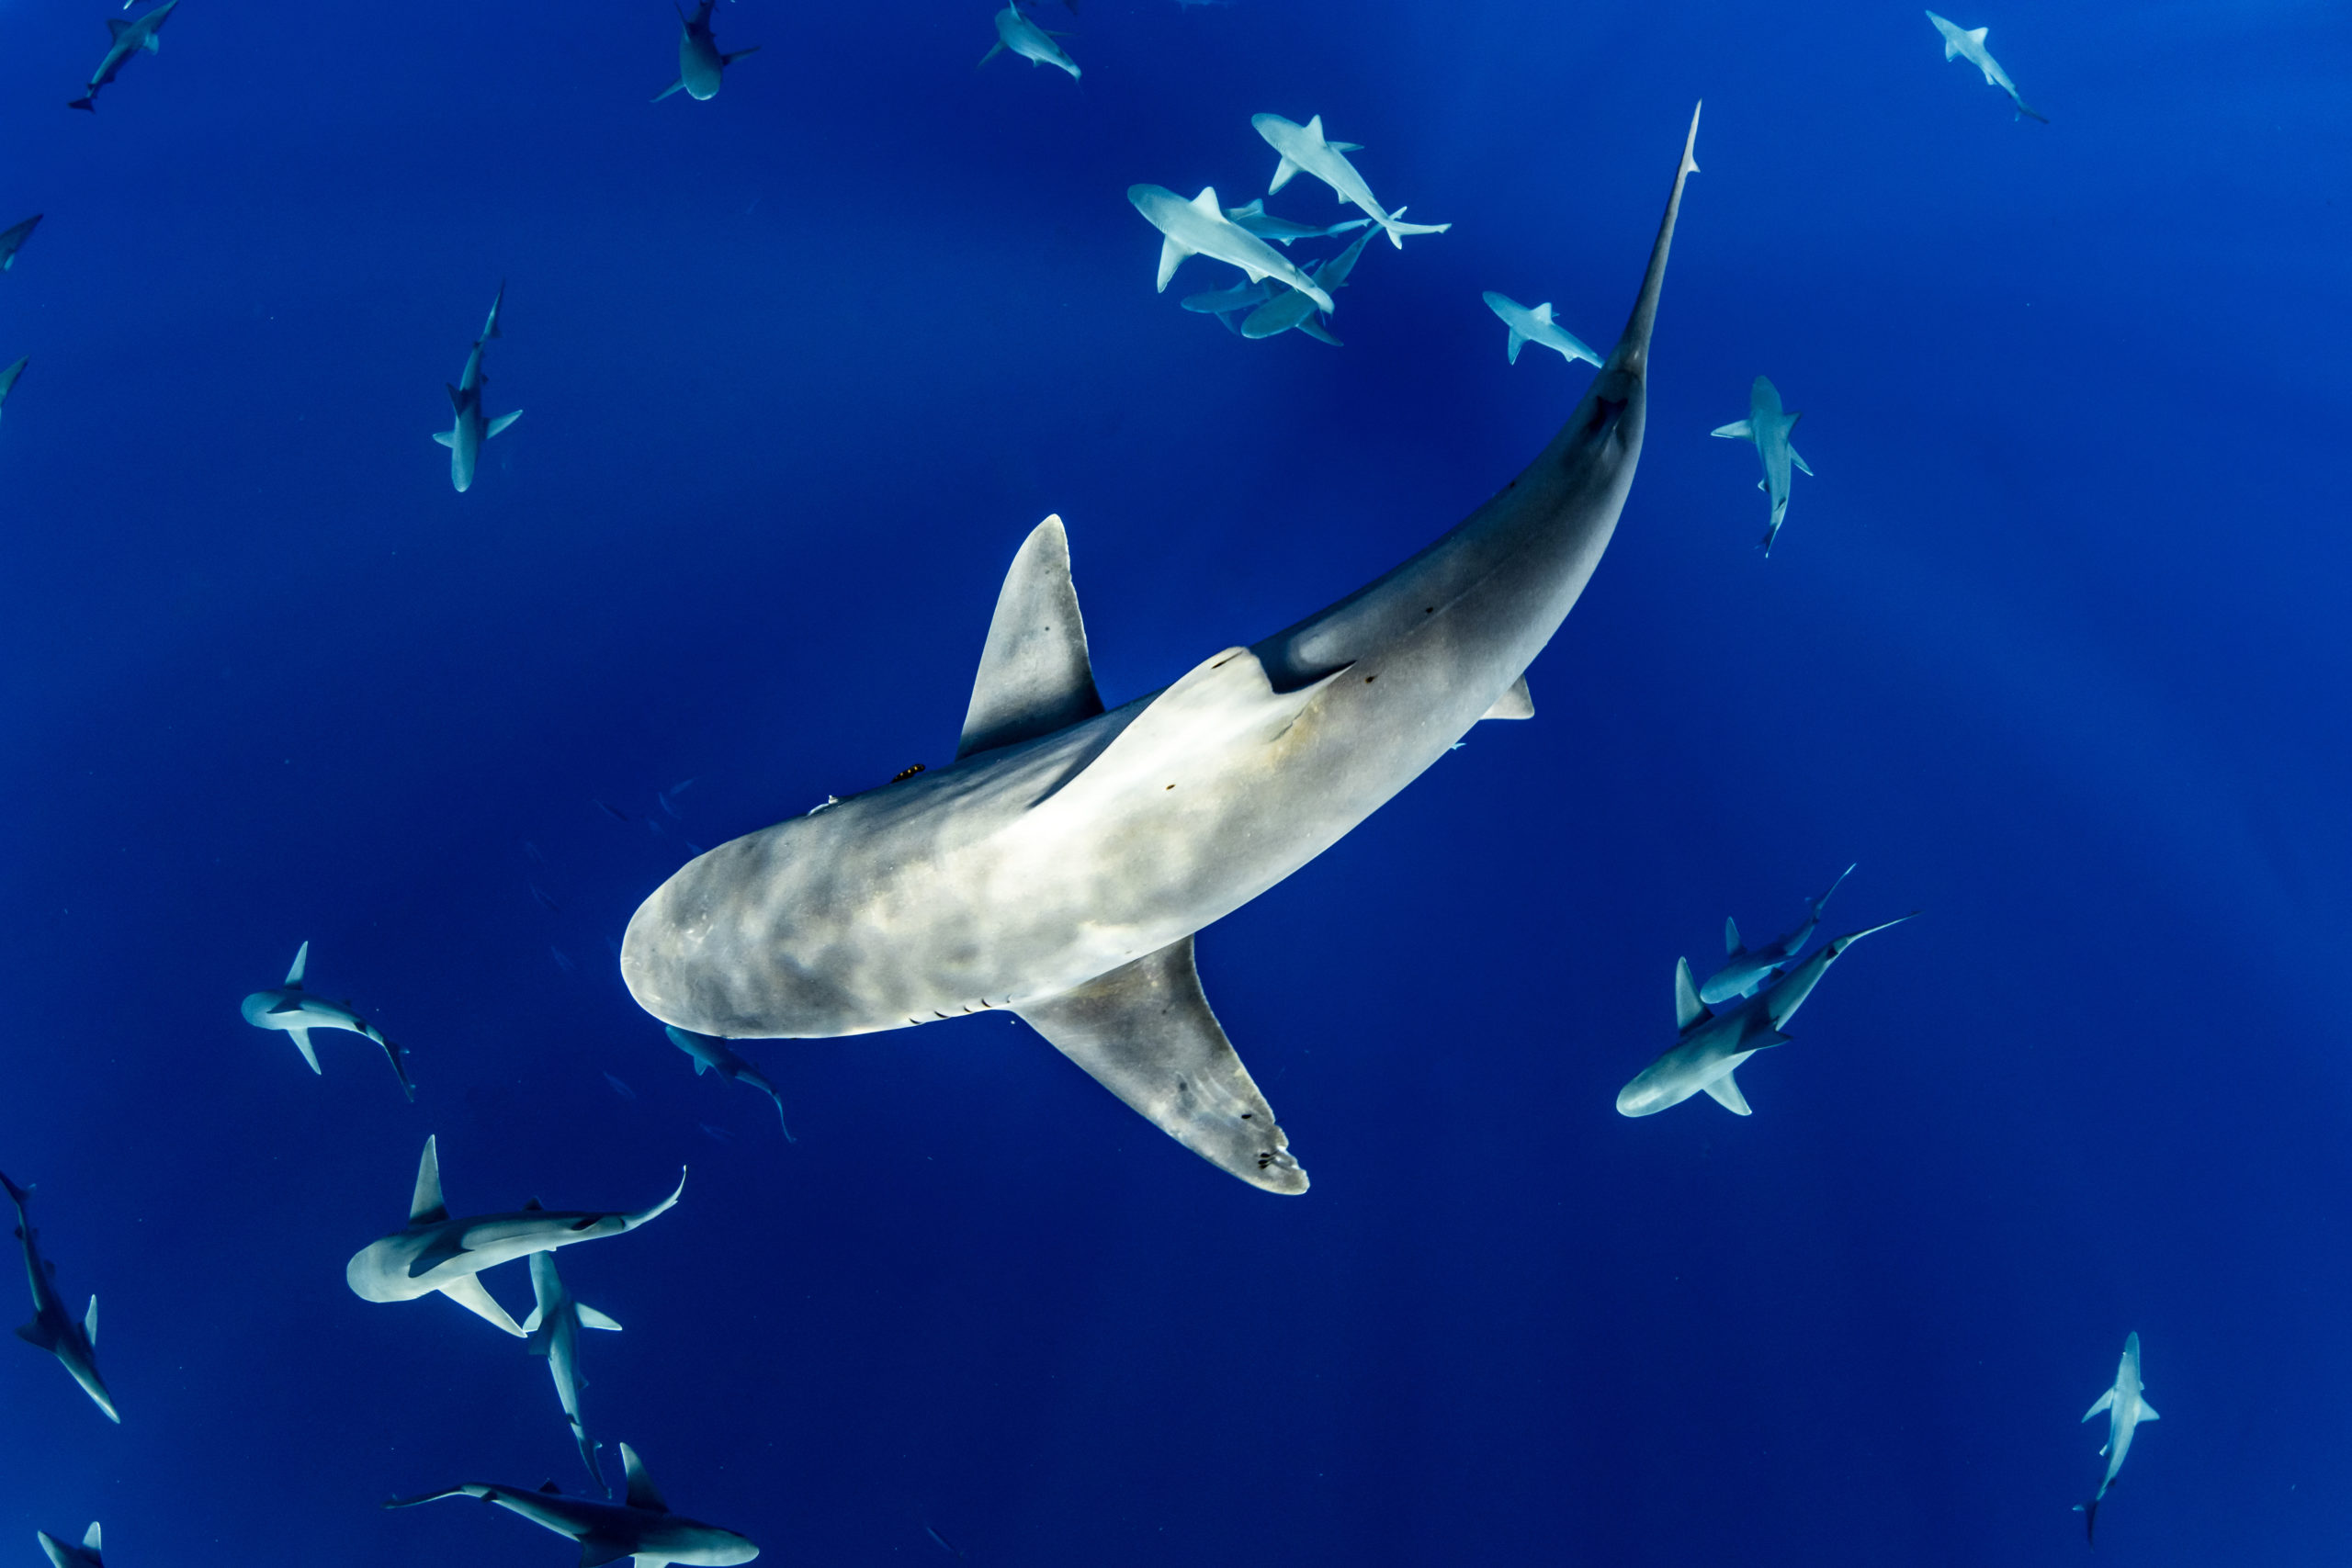 Britain has exported more than 50 tonnes of shark fins since 2017